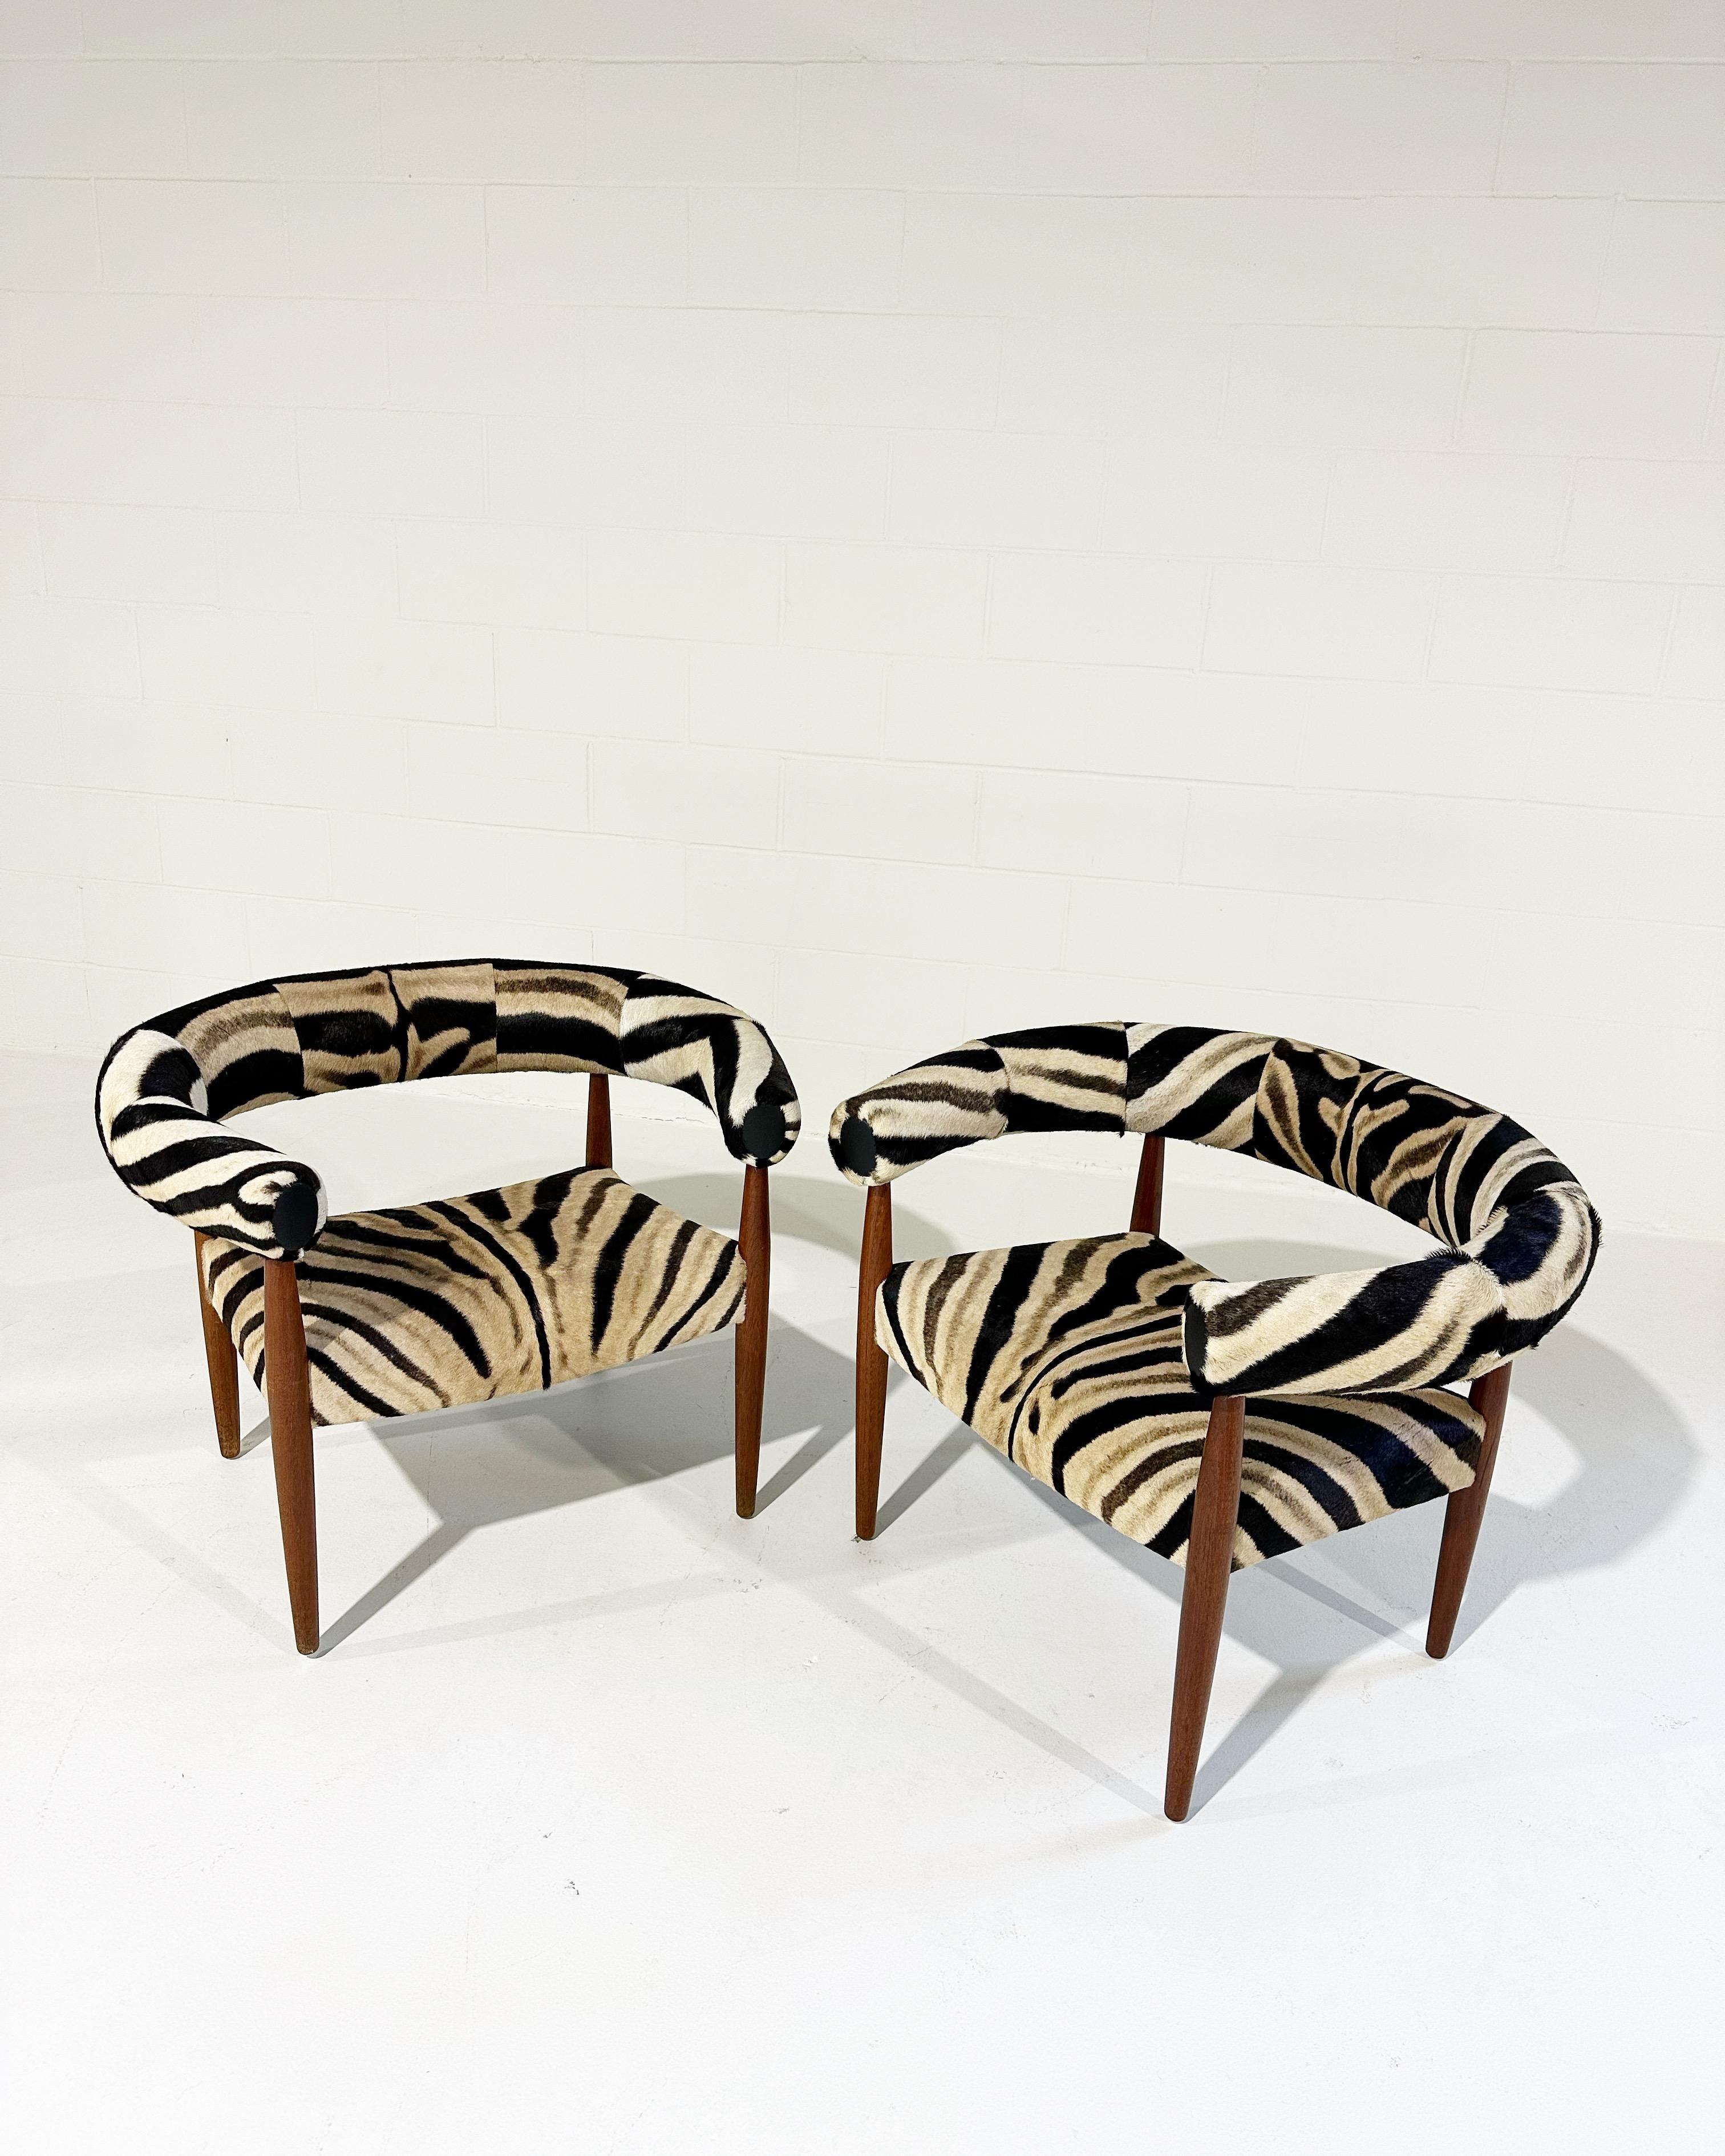 Vintage Nanna and Jorgen Ditzel Ring Lounge Chairs in Zebra Hide For Sale 5